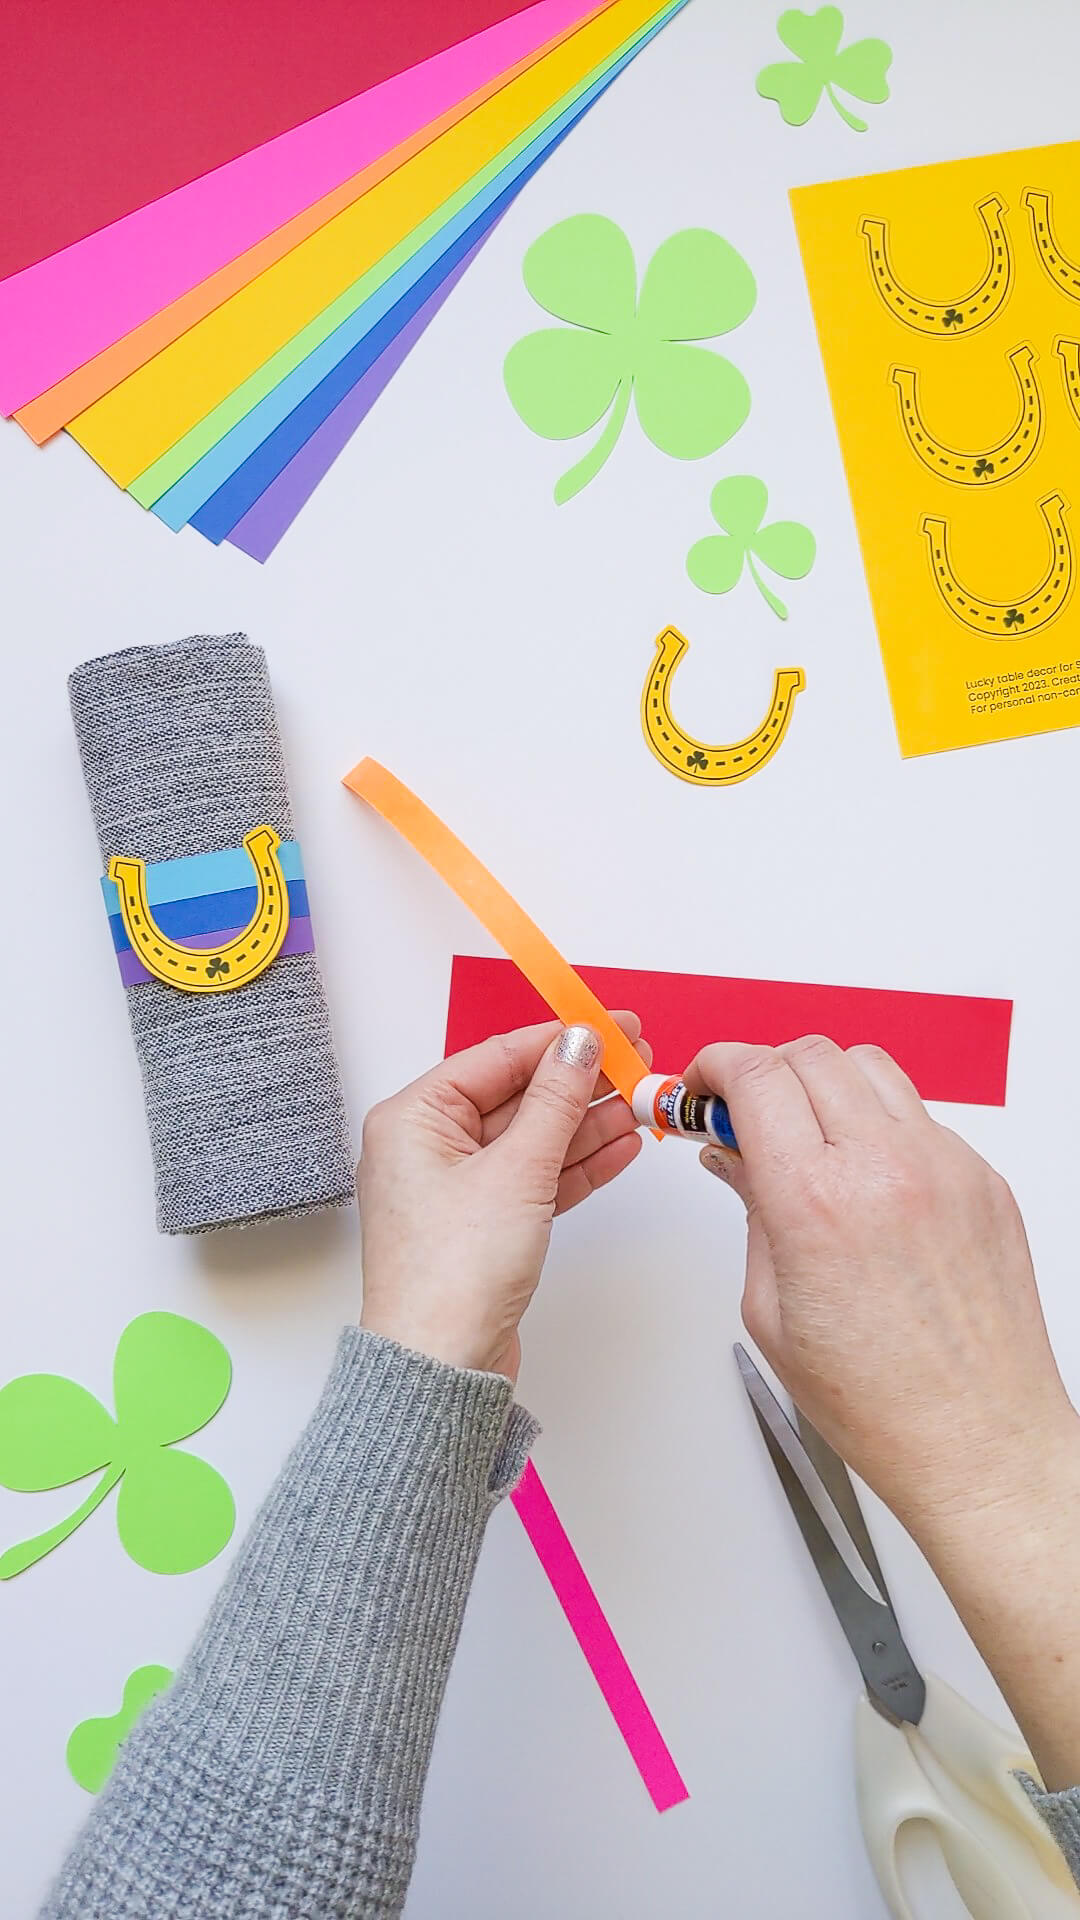 Gluing DIY rainbow napkin rings for the St. Patrick's Day dinner table